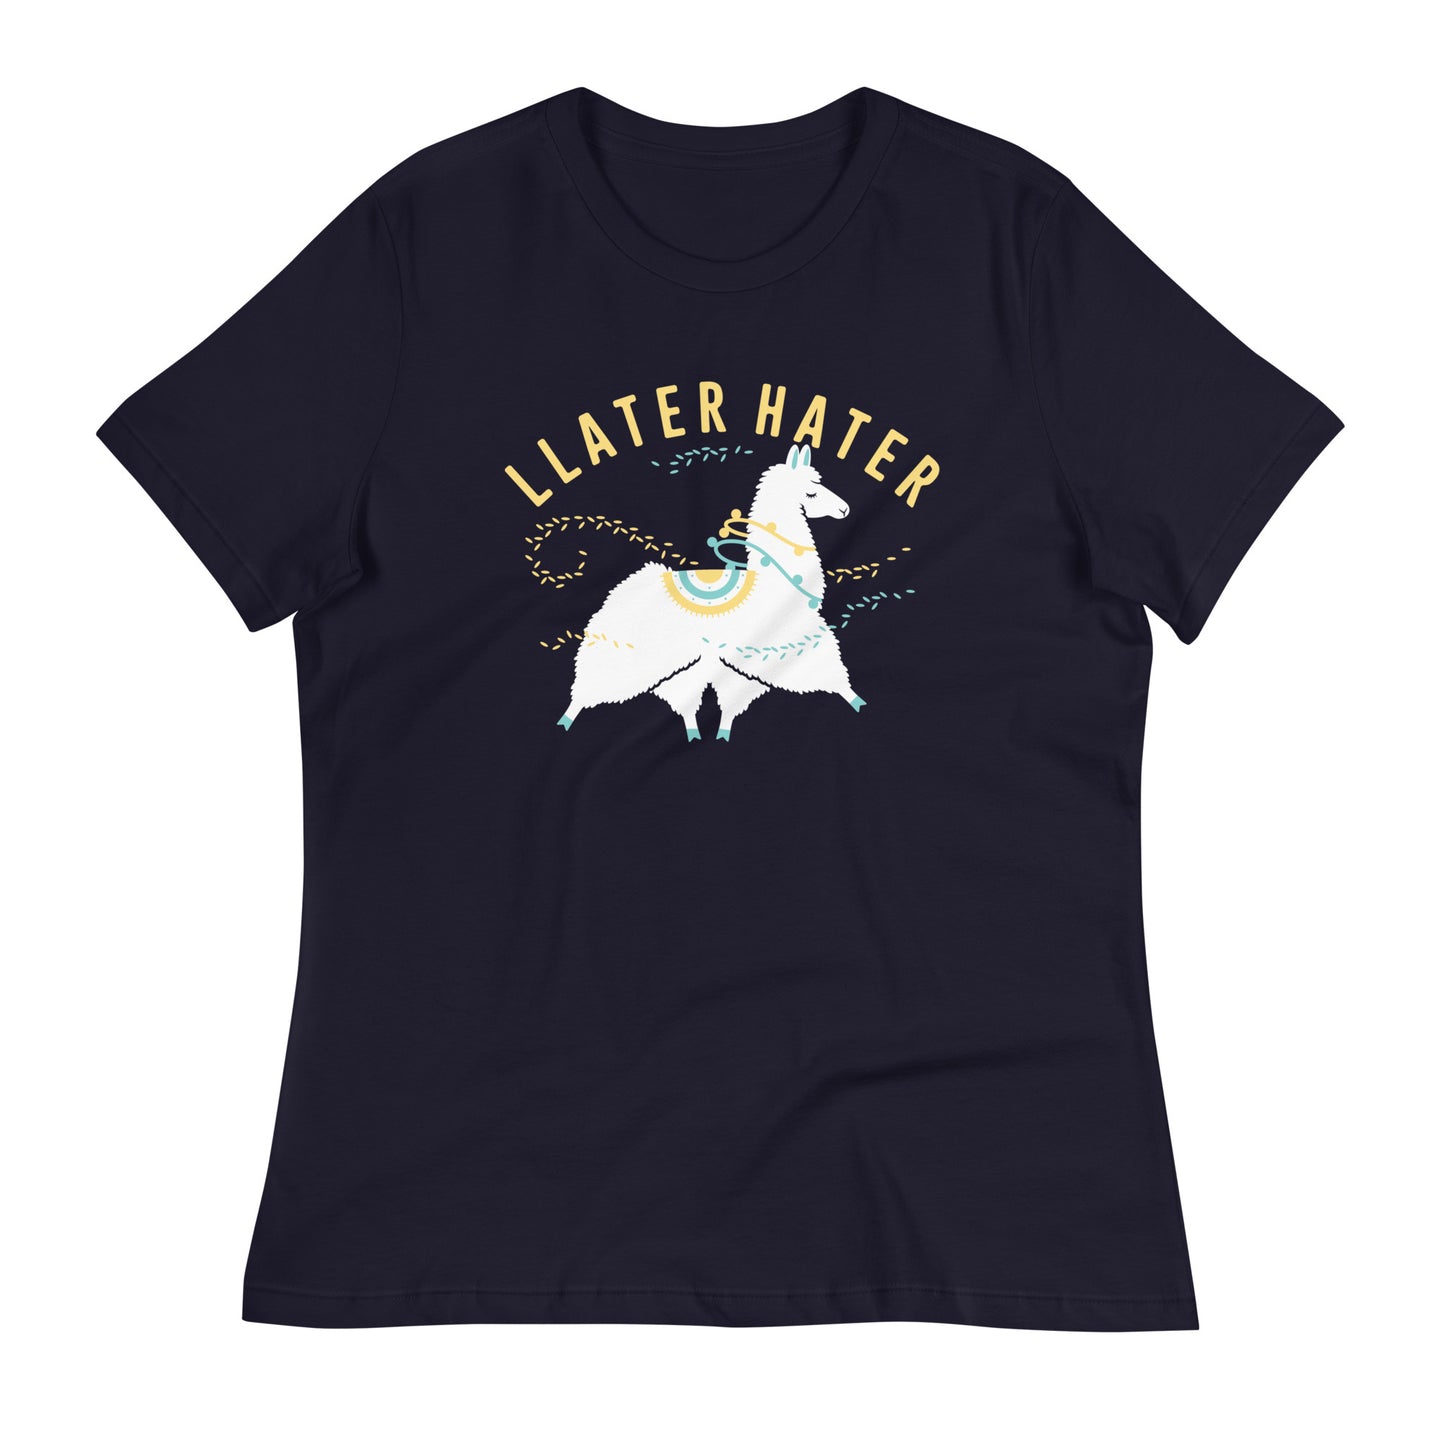 Llater Hater Women's Signature Tee